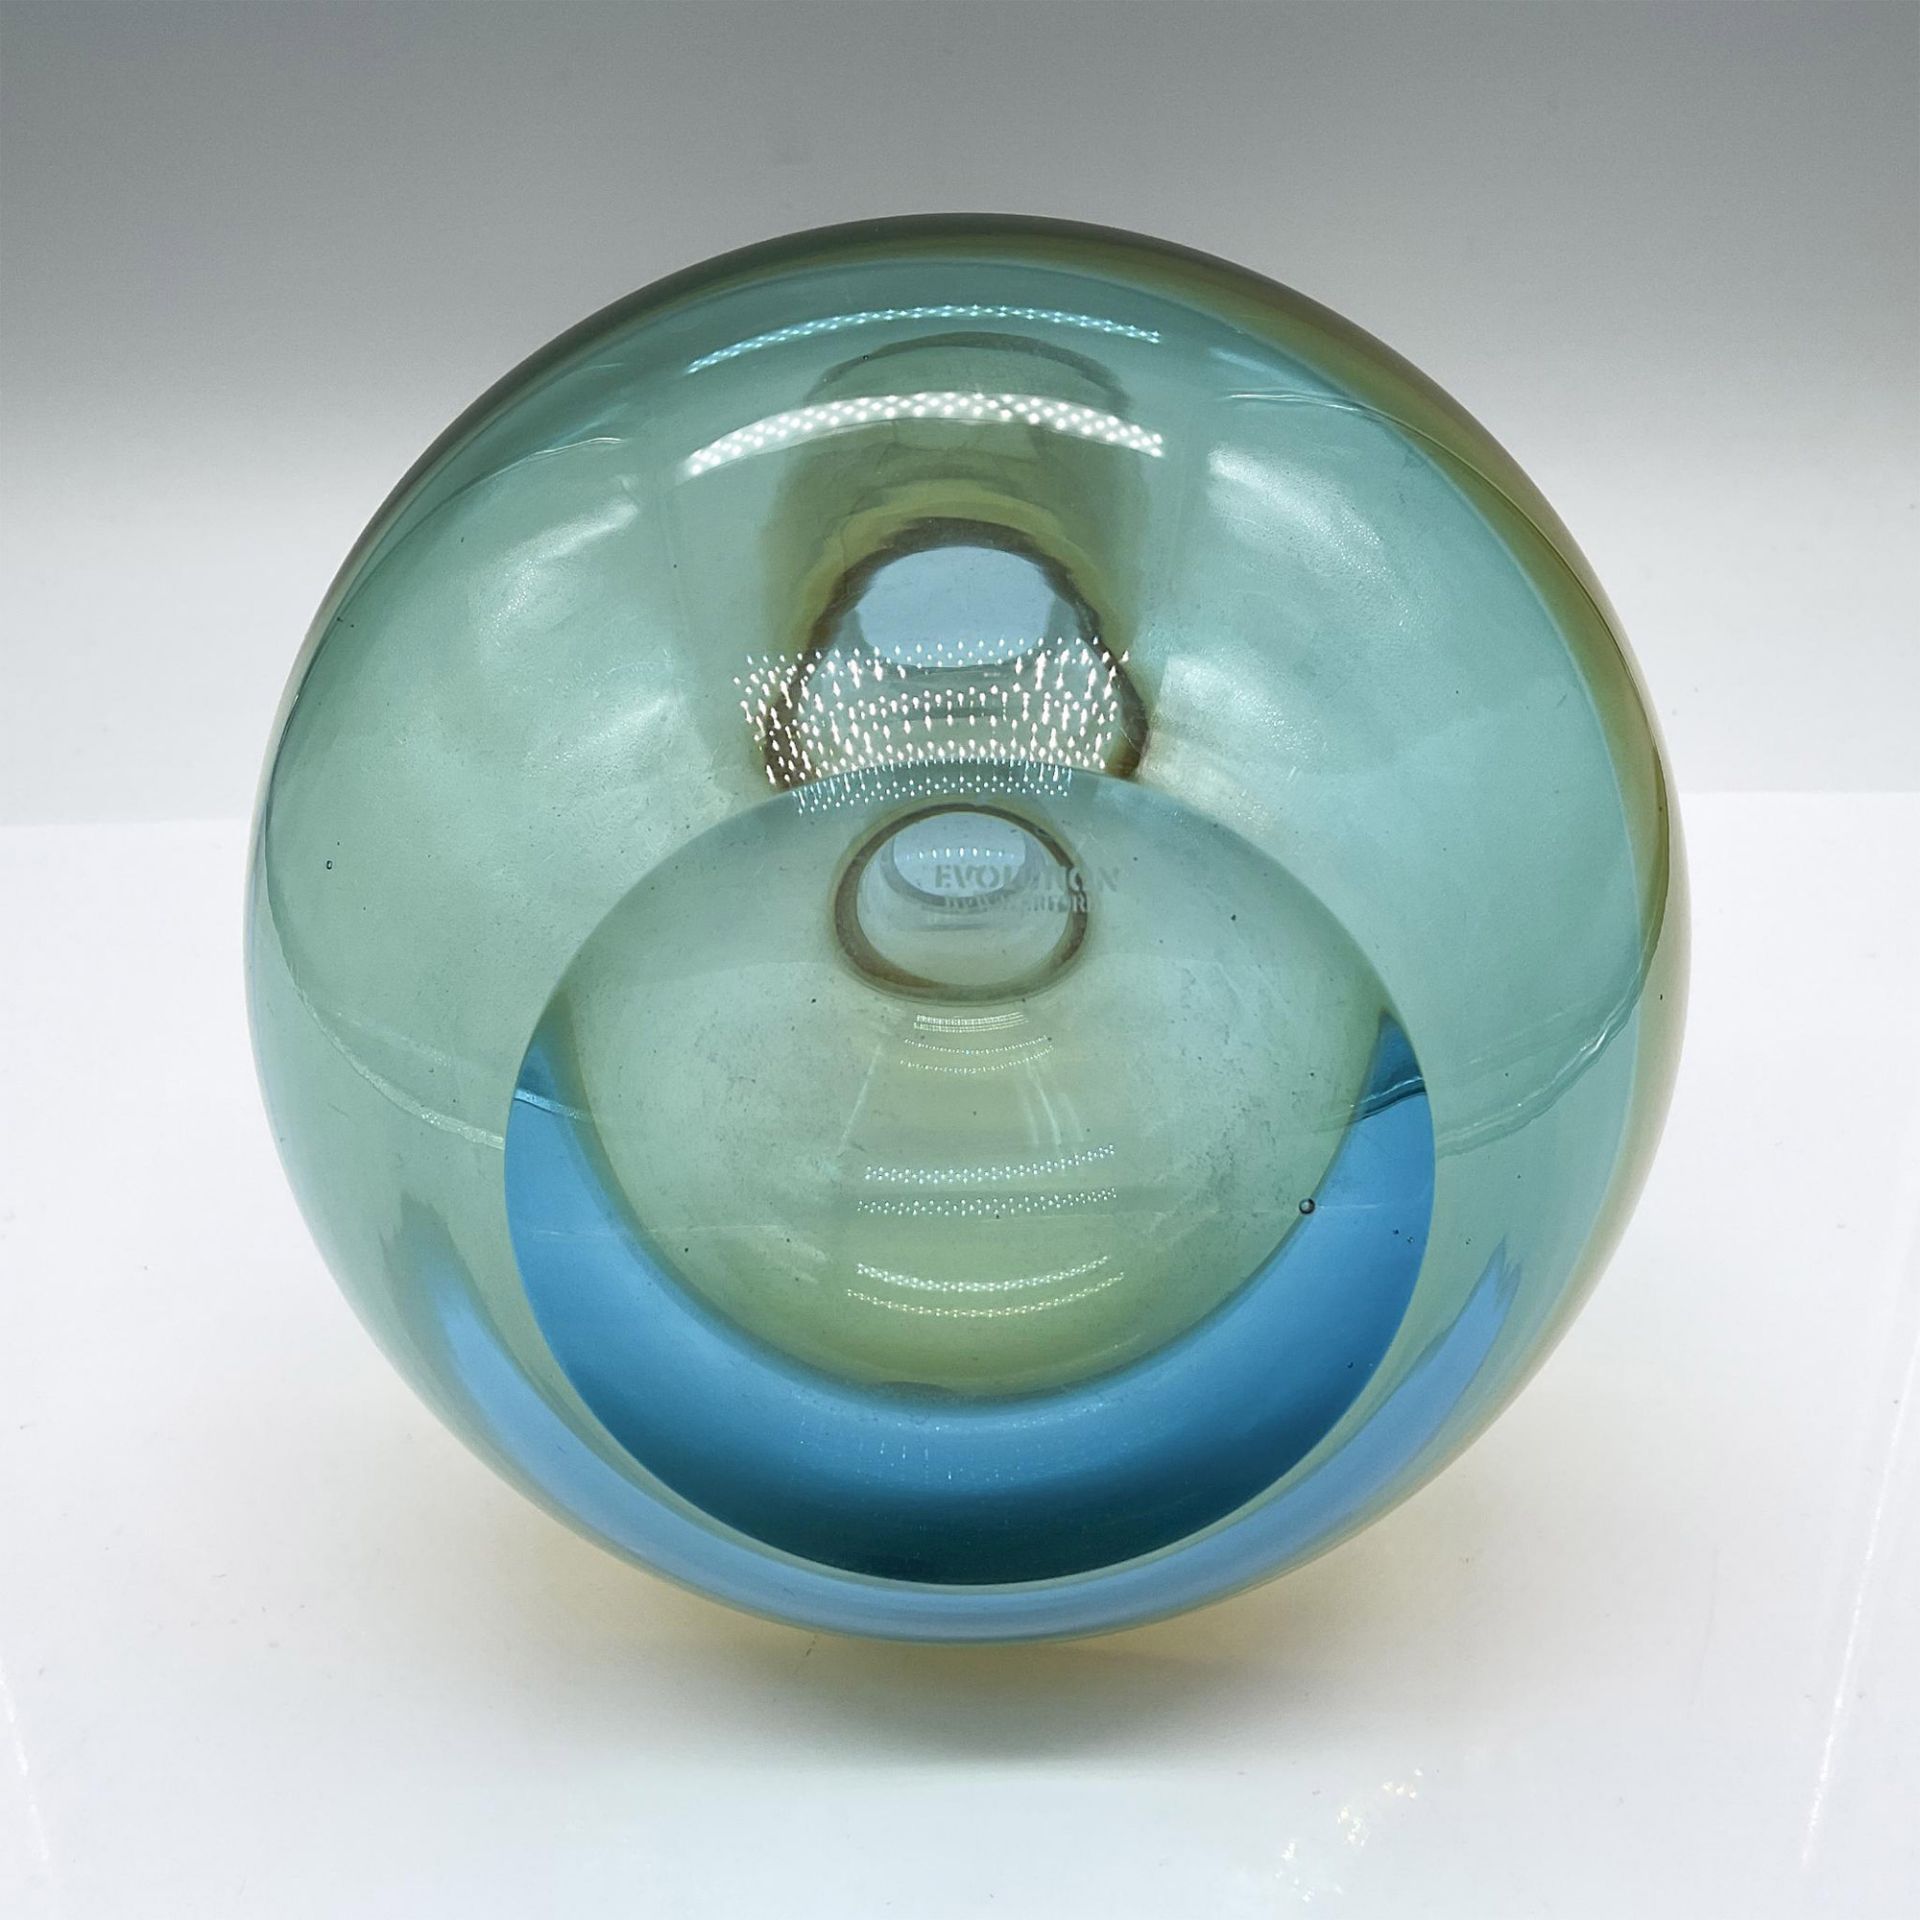 Waterford Turquoise and Amber Vase, Evolution - Image 3 of 3